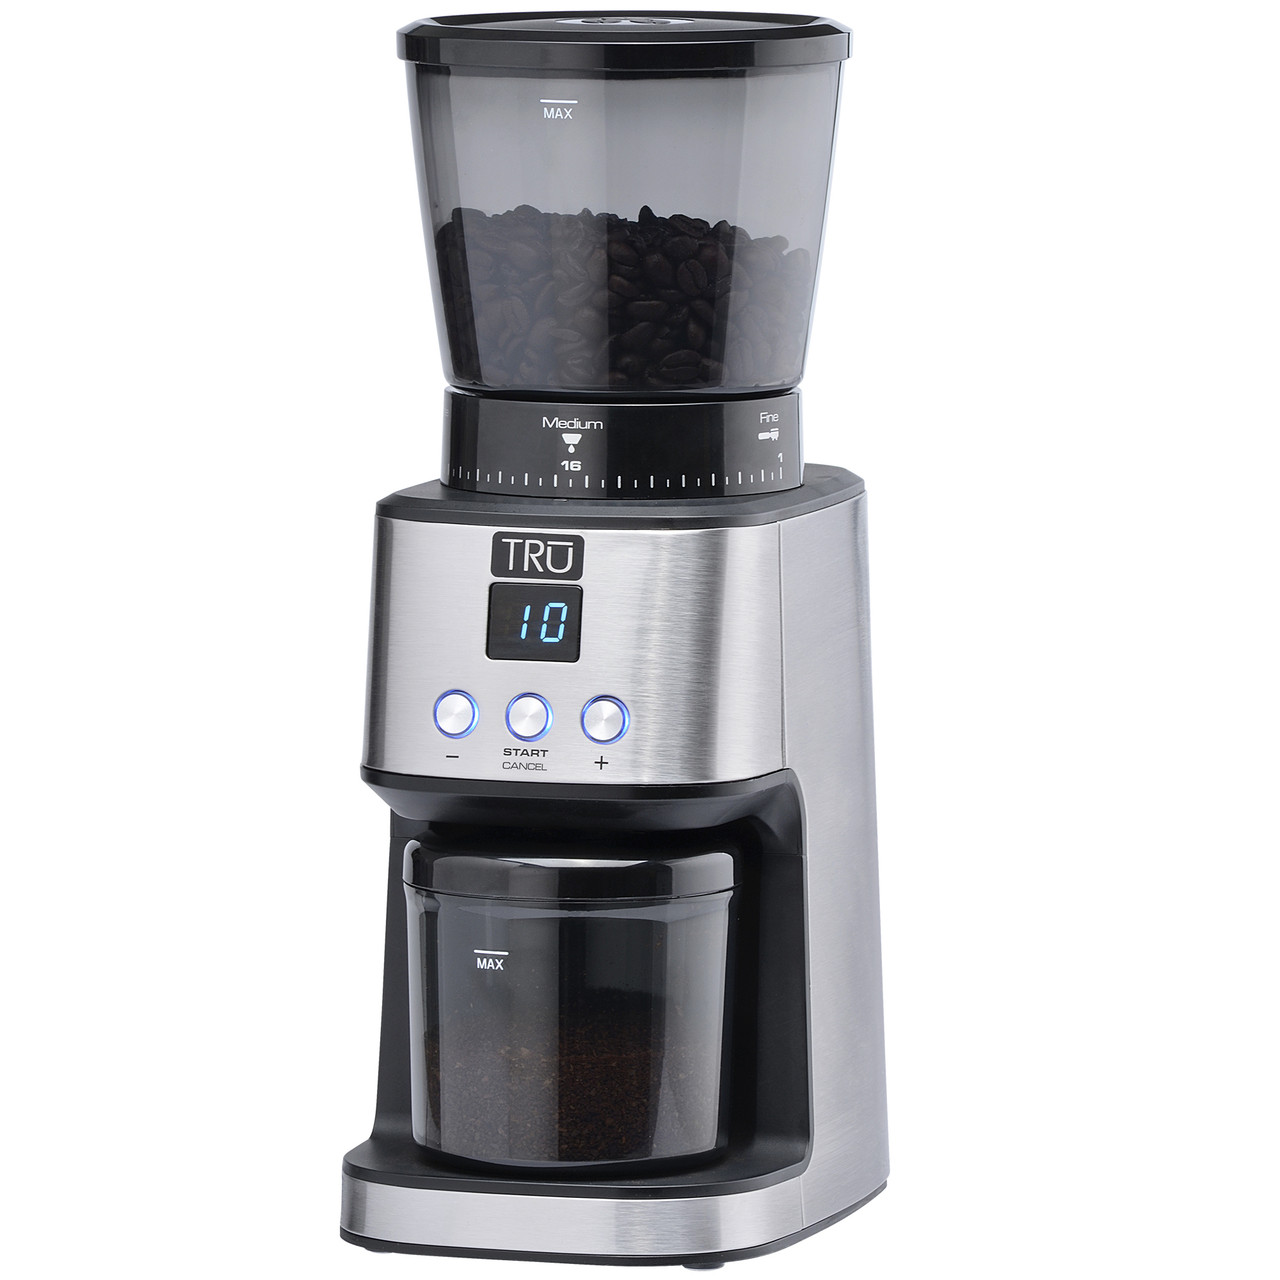 Electric Burr Coffee Grinder with 18 Grind Settings, Cleaning